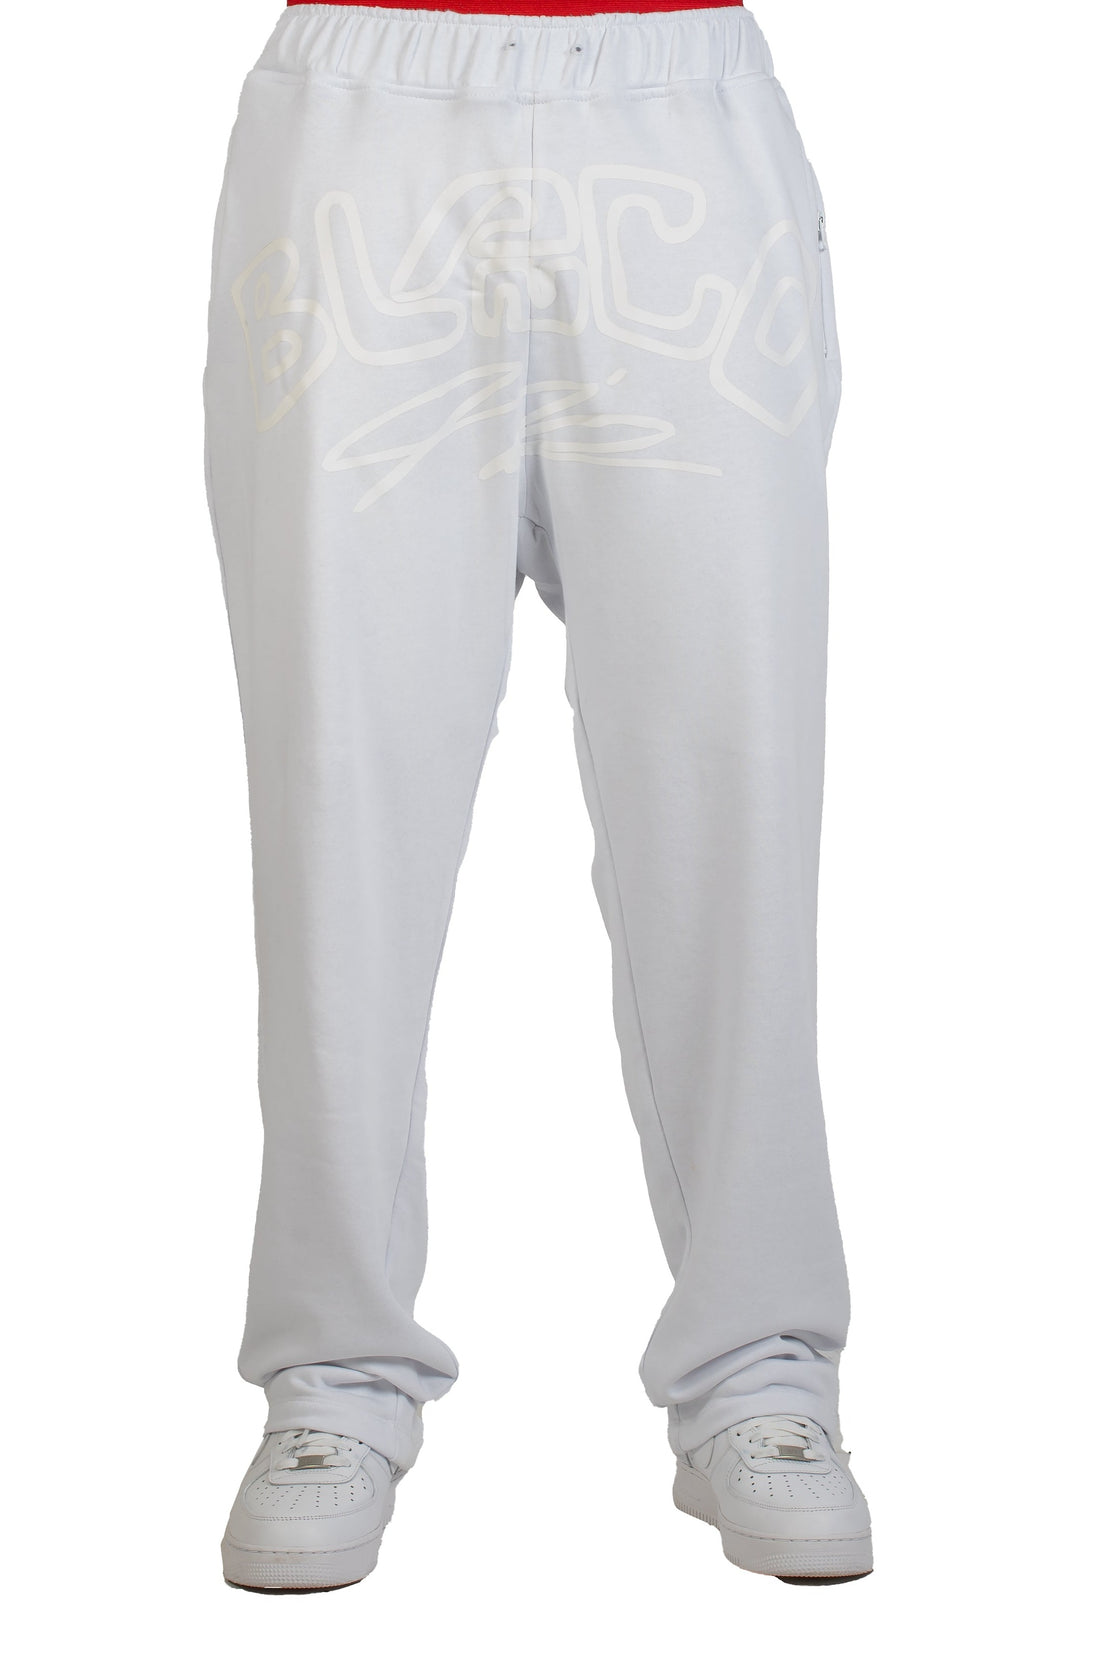 Buy High Quality Men's Essential White Baggy Sweatpants - BLANCO AIR